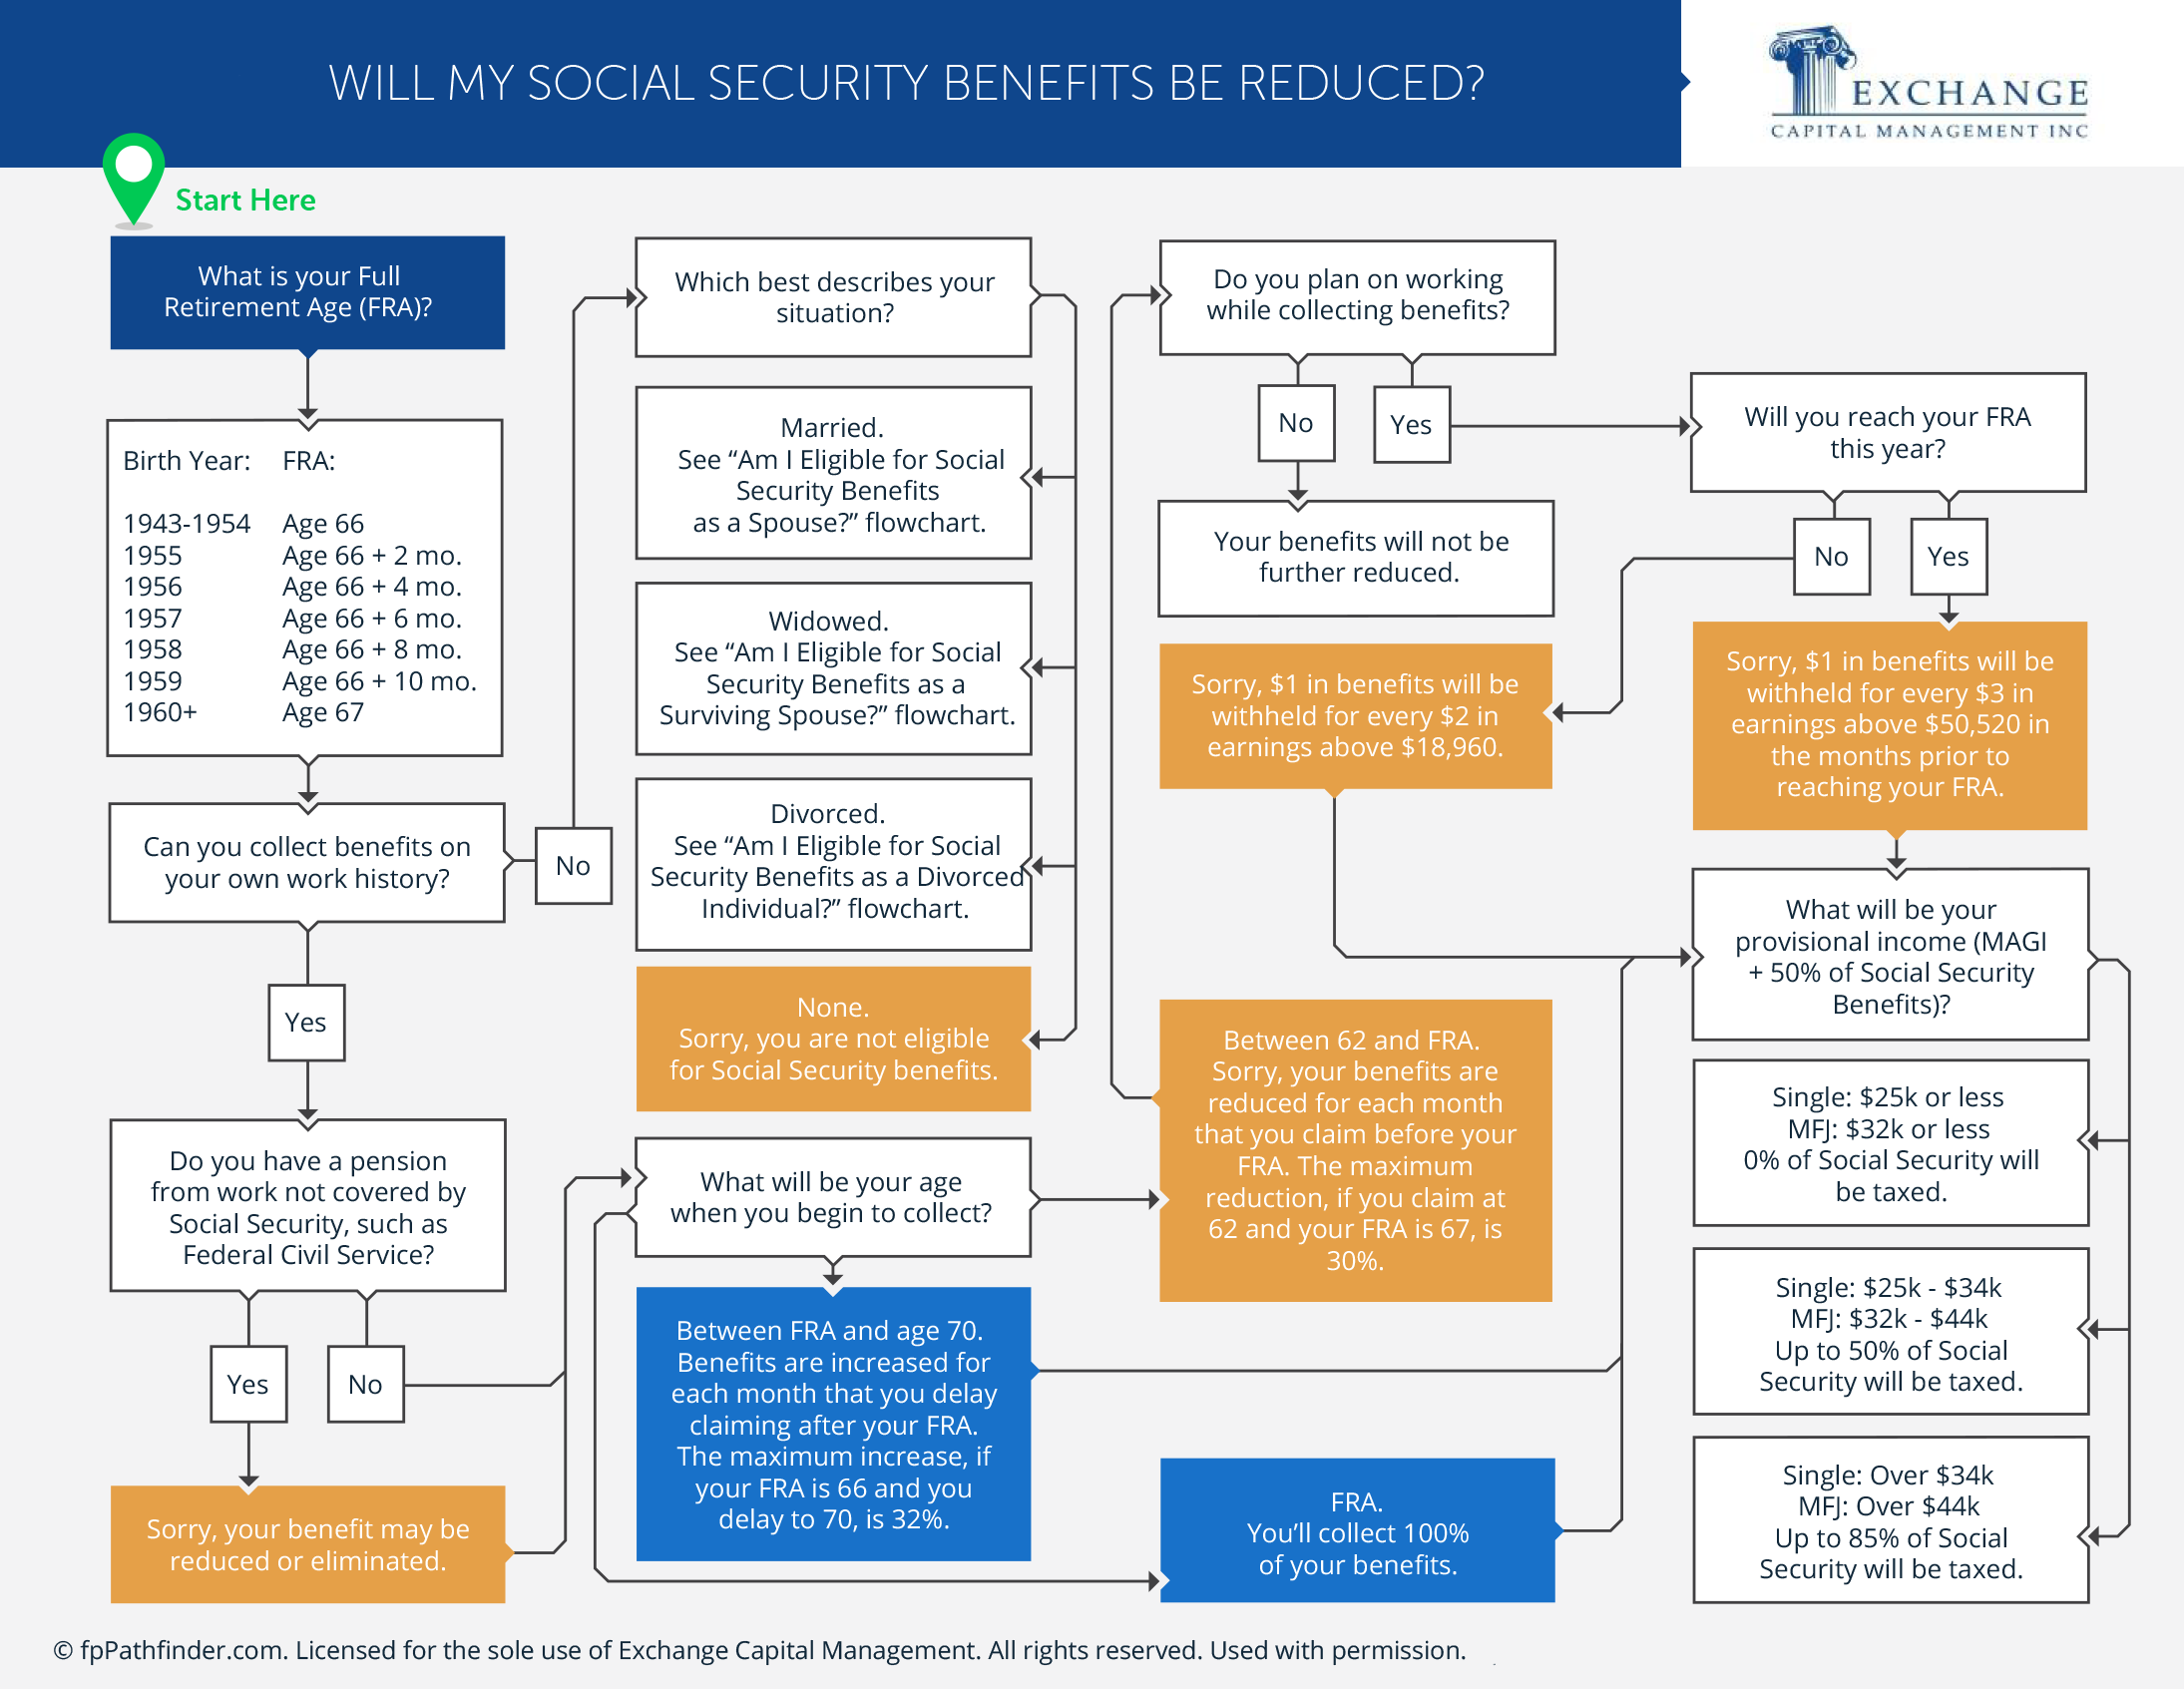 Will My Social Security Benefits Be Reduced?